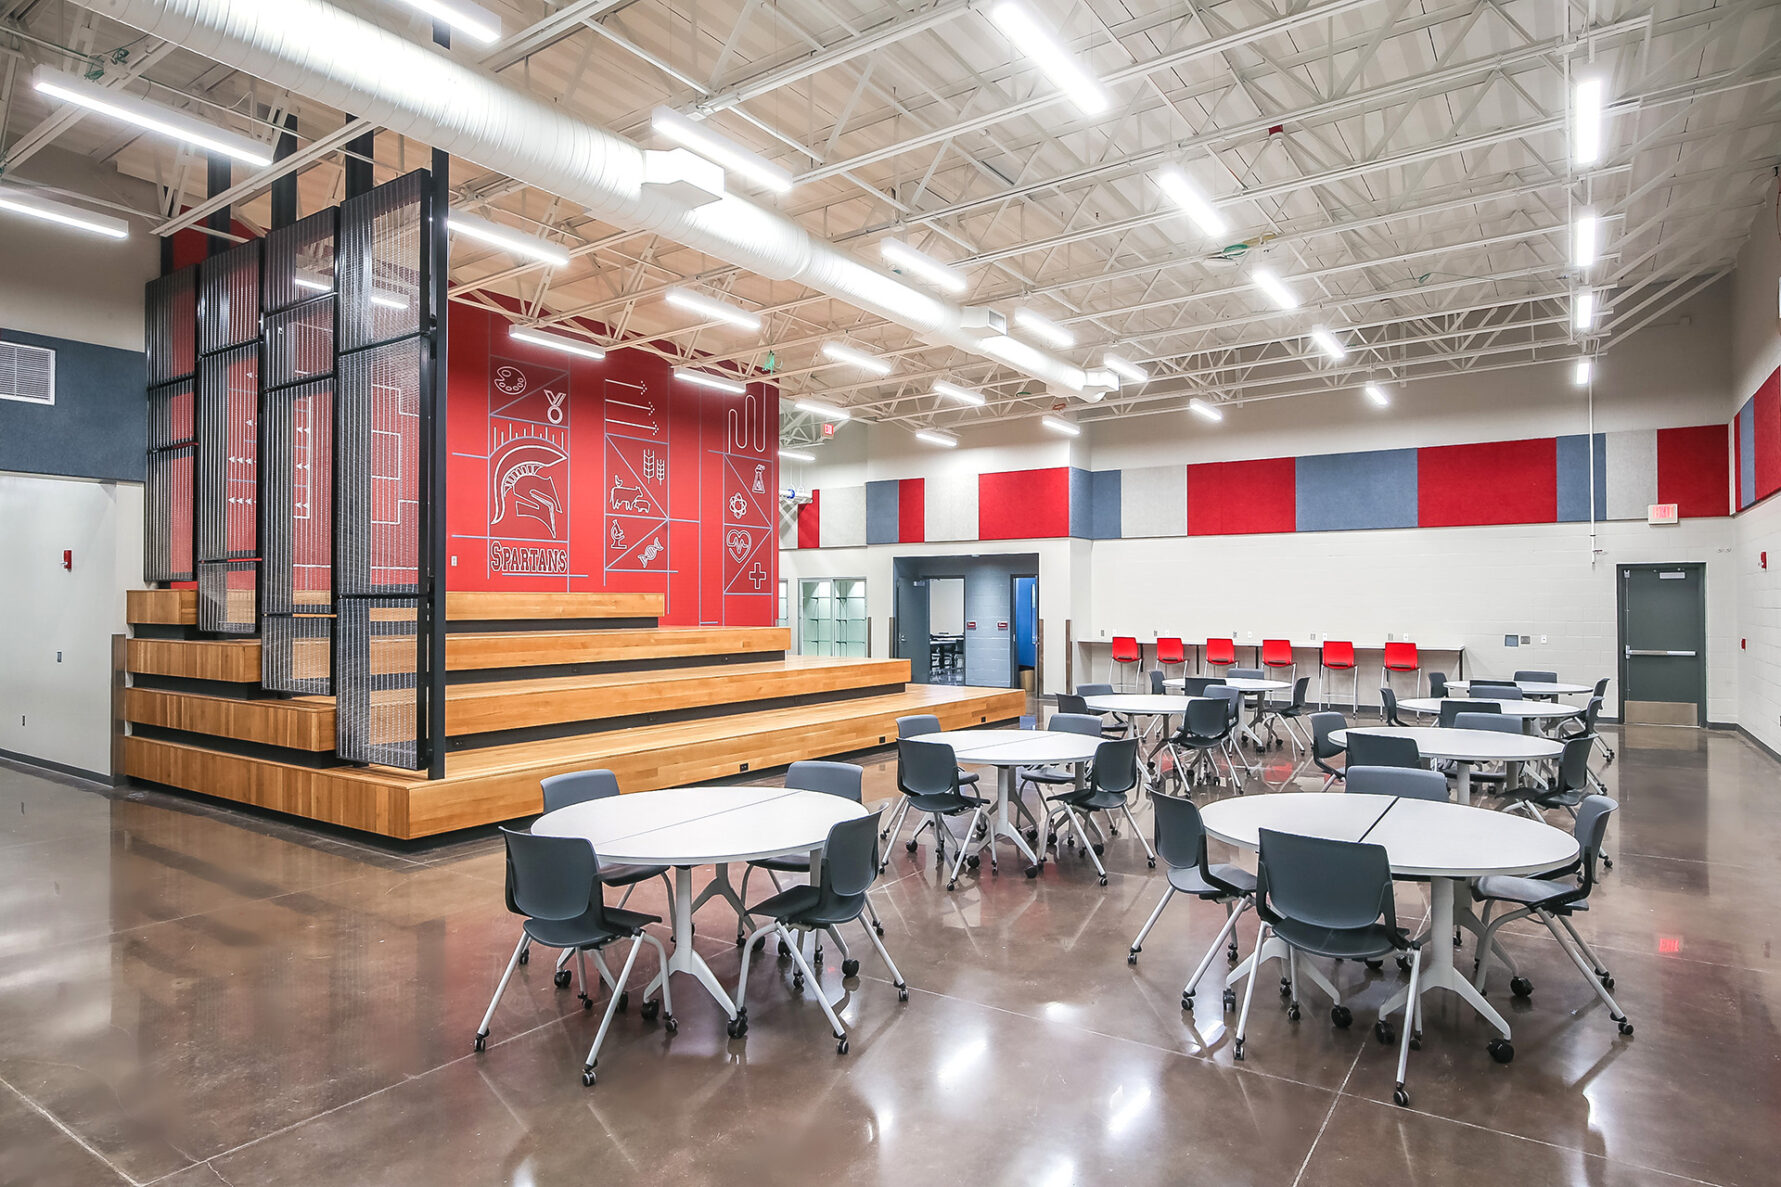 A commons area at Emporia High School, a McCownGordon project.